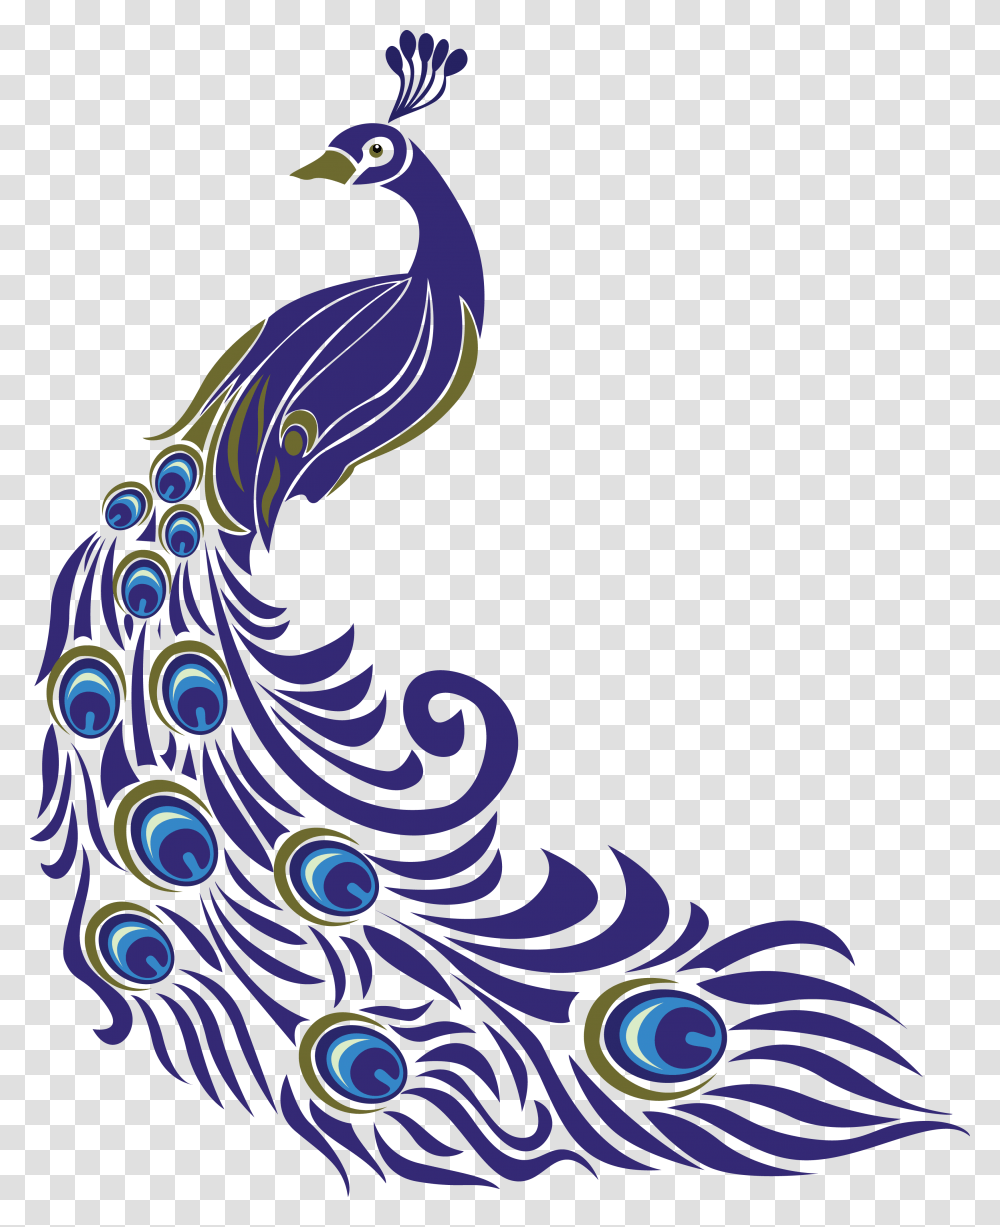 Mor Pankh Drawing Of Peacock With Colour, Pattern, Floral Design Transparent Png